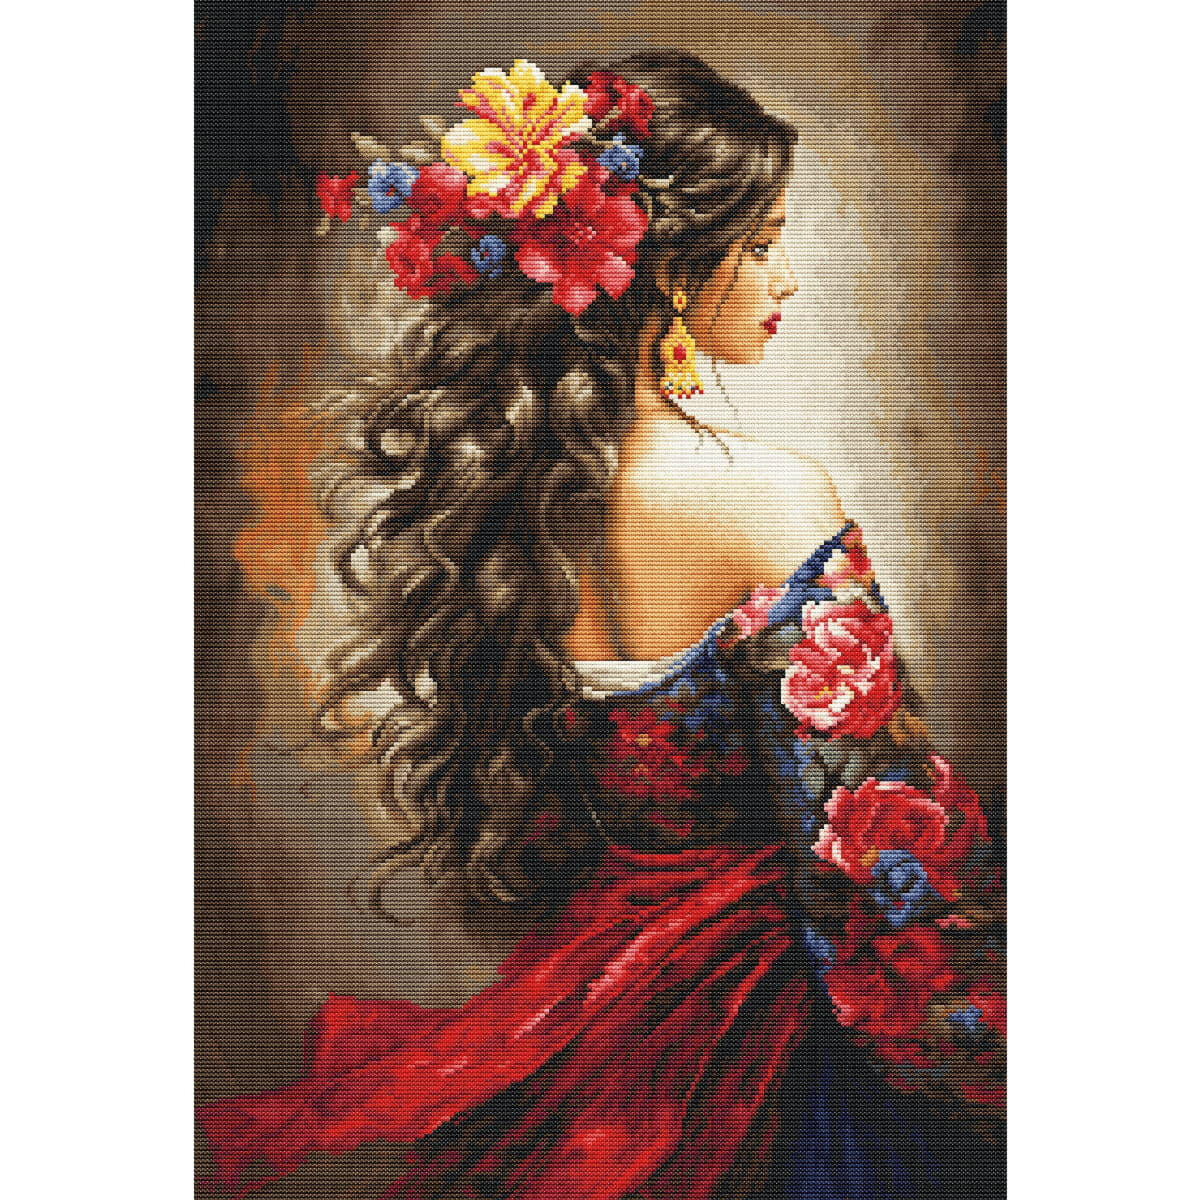 A painting of a woman with long, wavy hair adorned with...